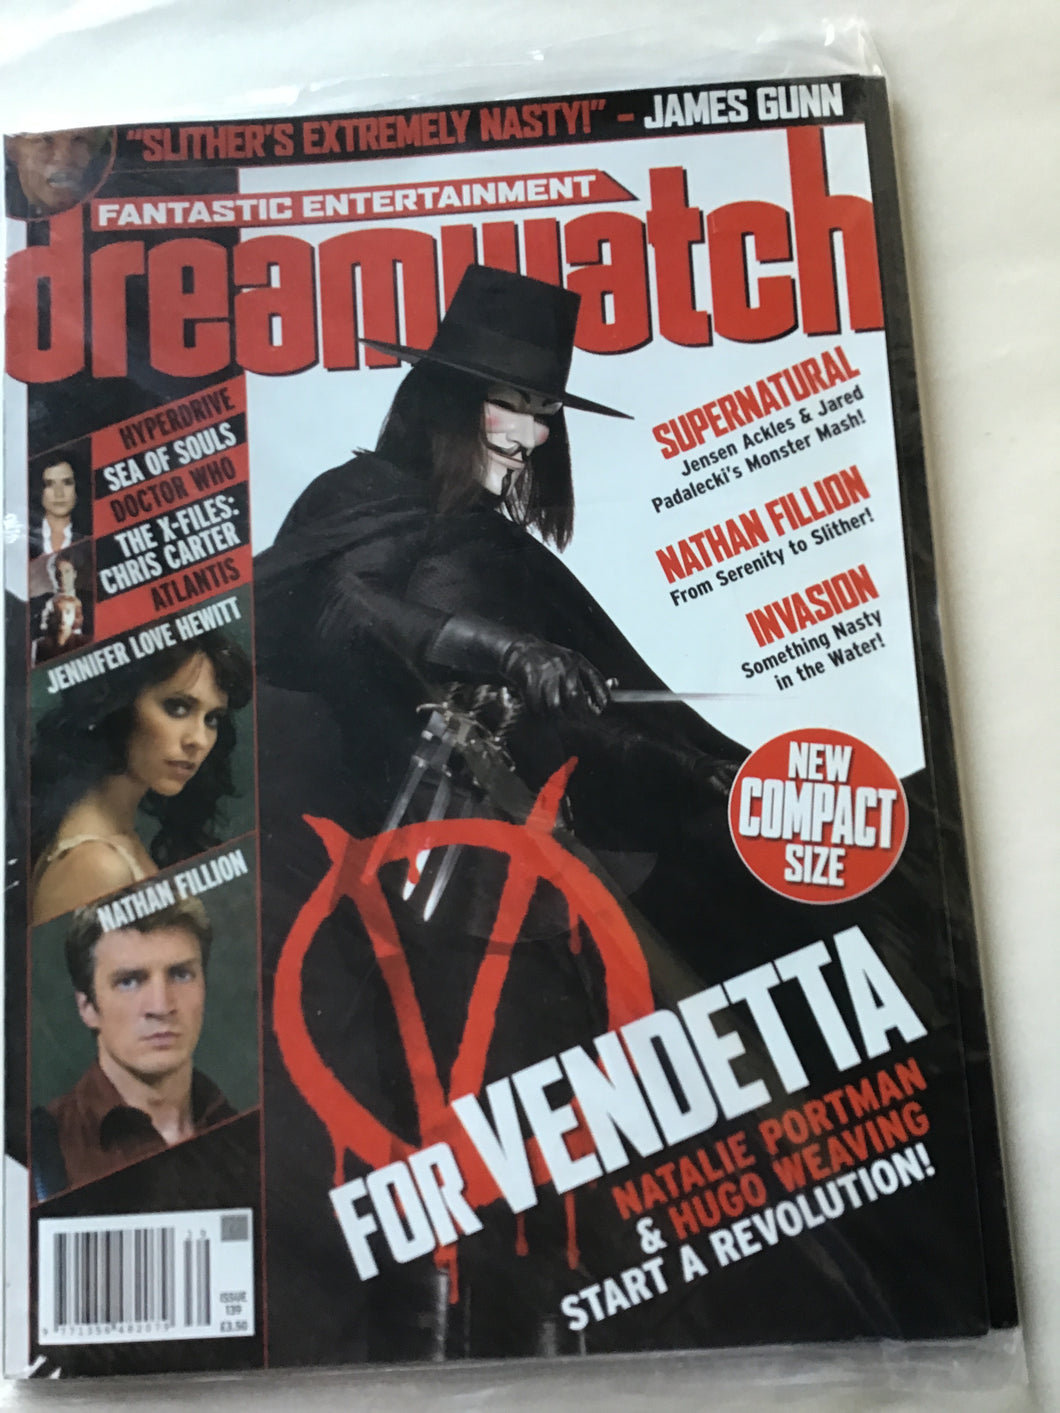 Dream watch magazine April 2006 issue 139V for vendetta supernatural invasion Doctor Who X-Files